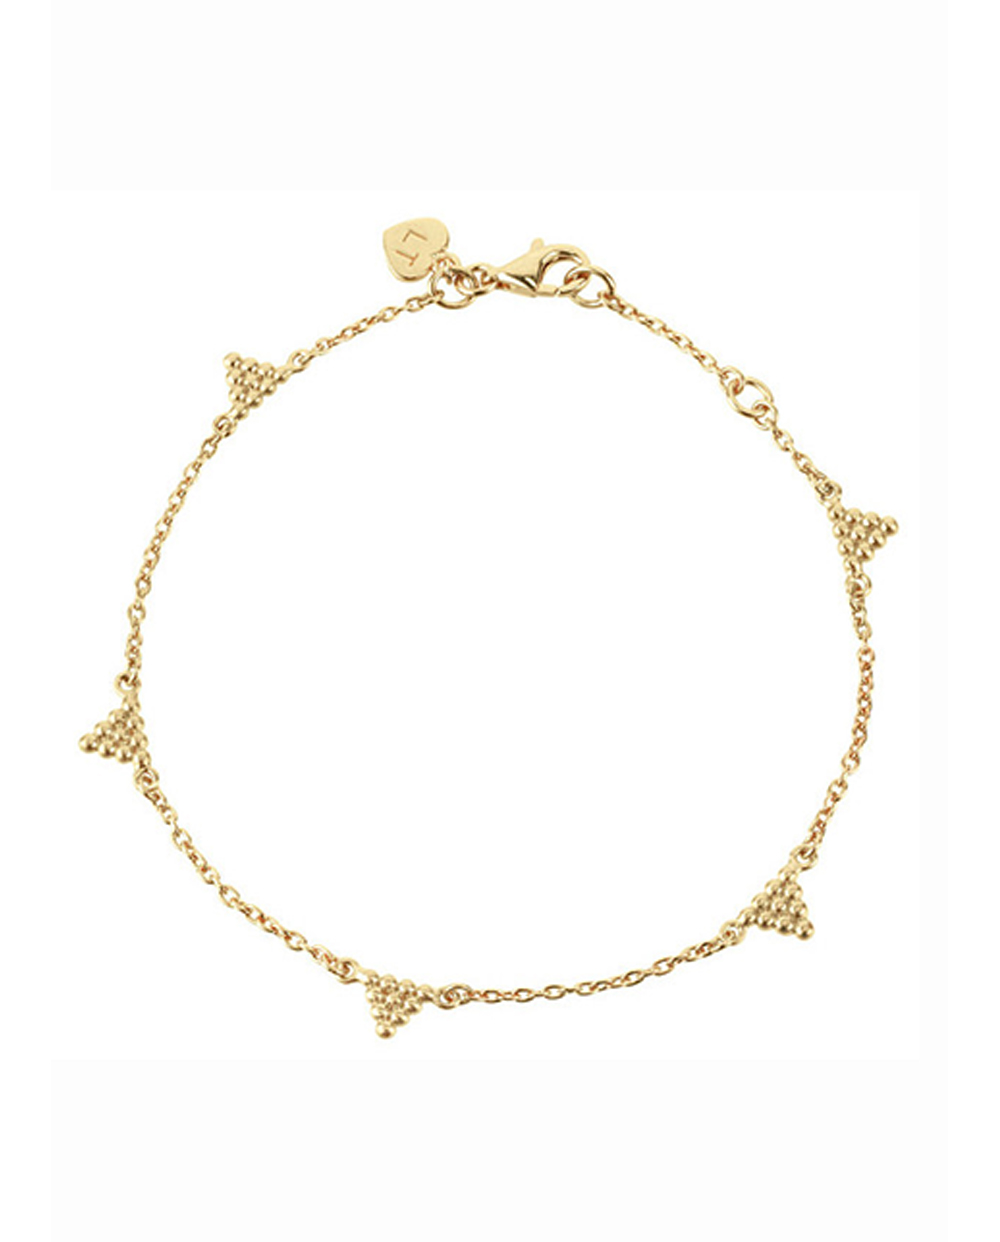 30+ Items We Can't Believe Are On Sale Right Now And We're #AddingToCart | Linda Tahija Kuchi Kuchi Bracelet, $79 (was $158) from Well Made Clothes